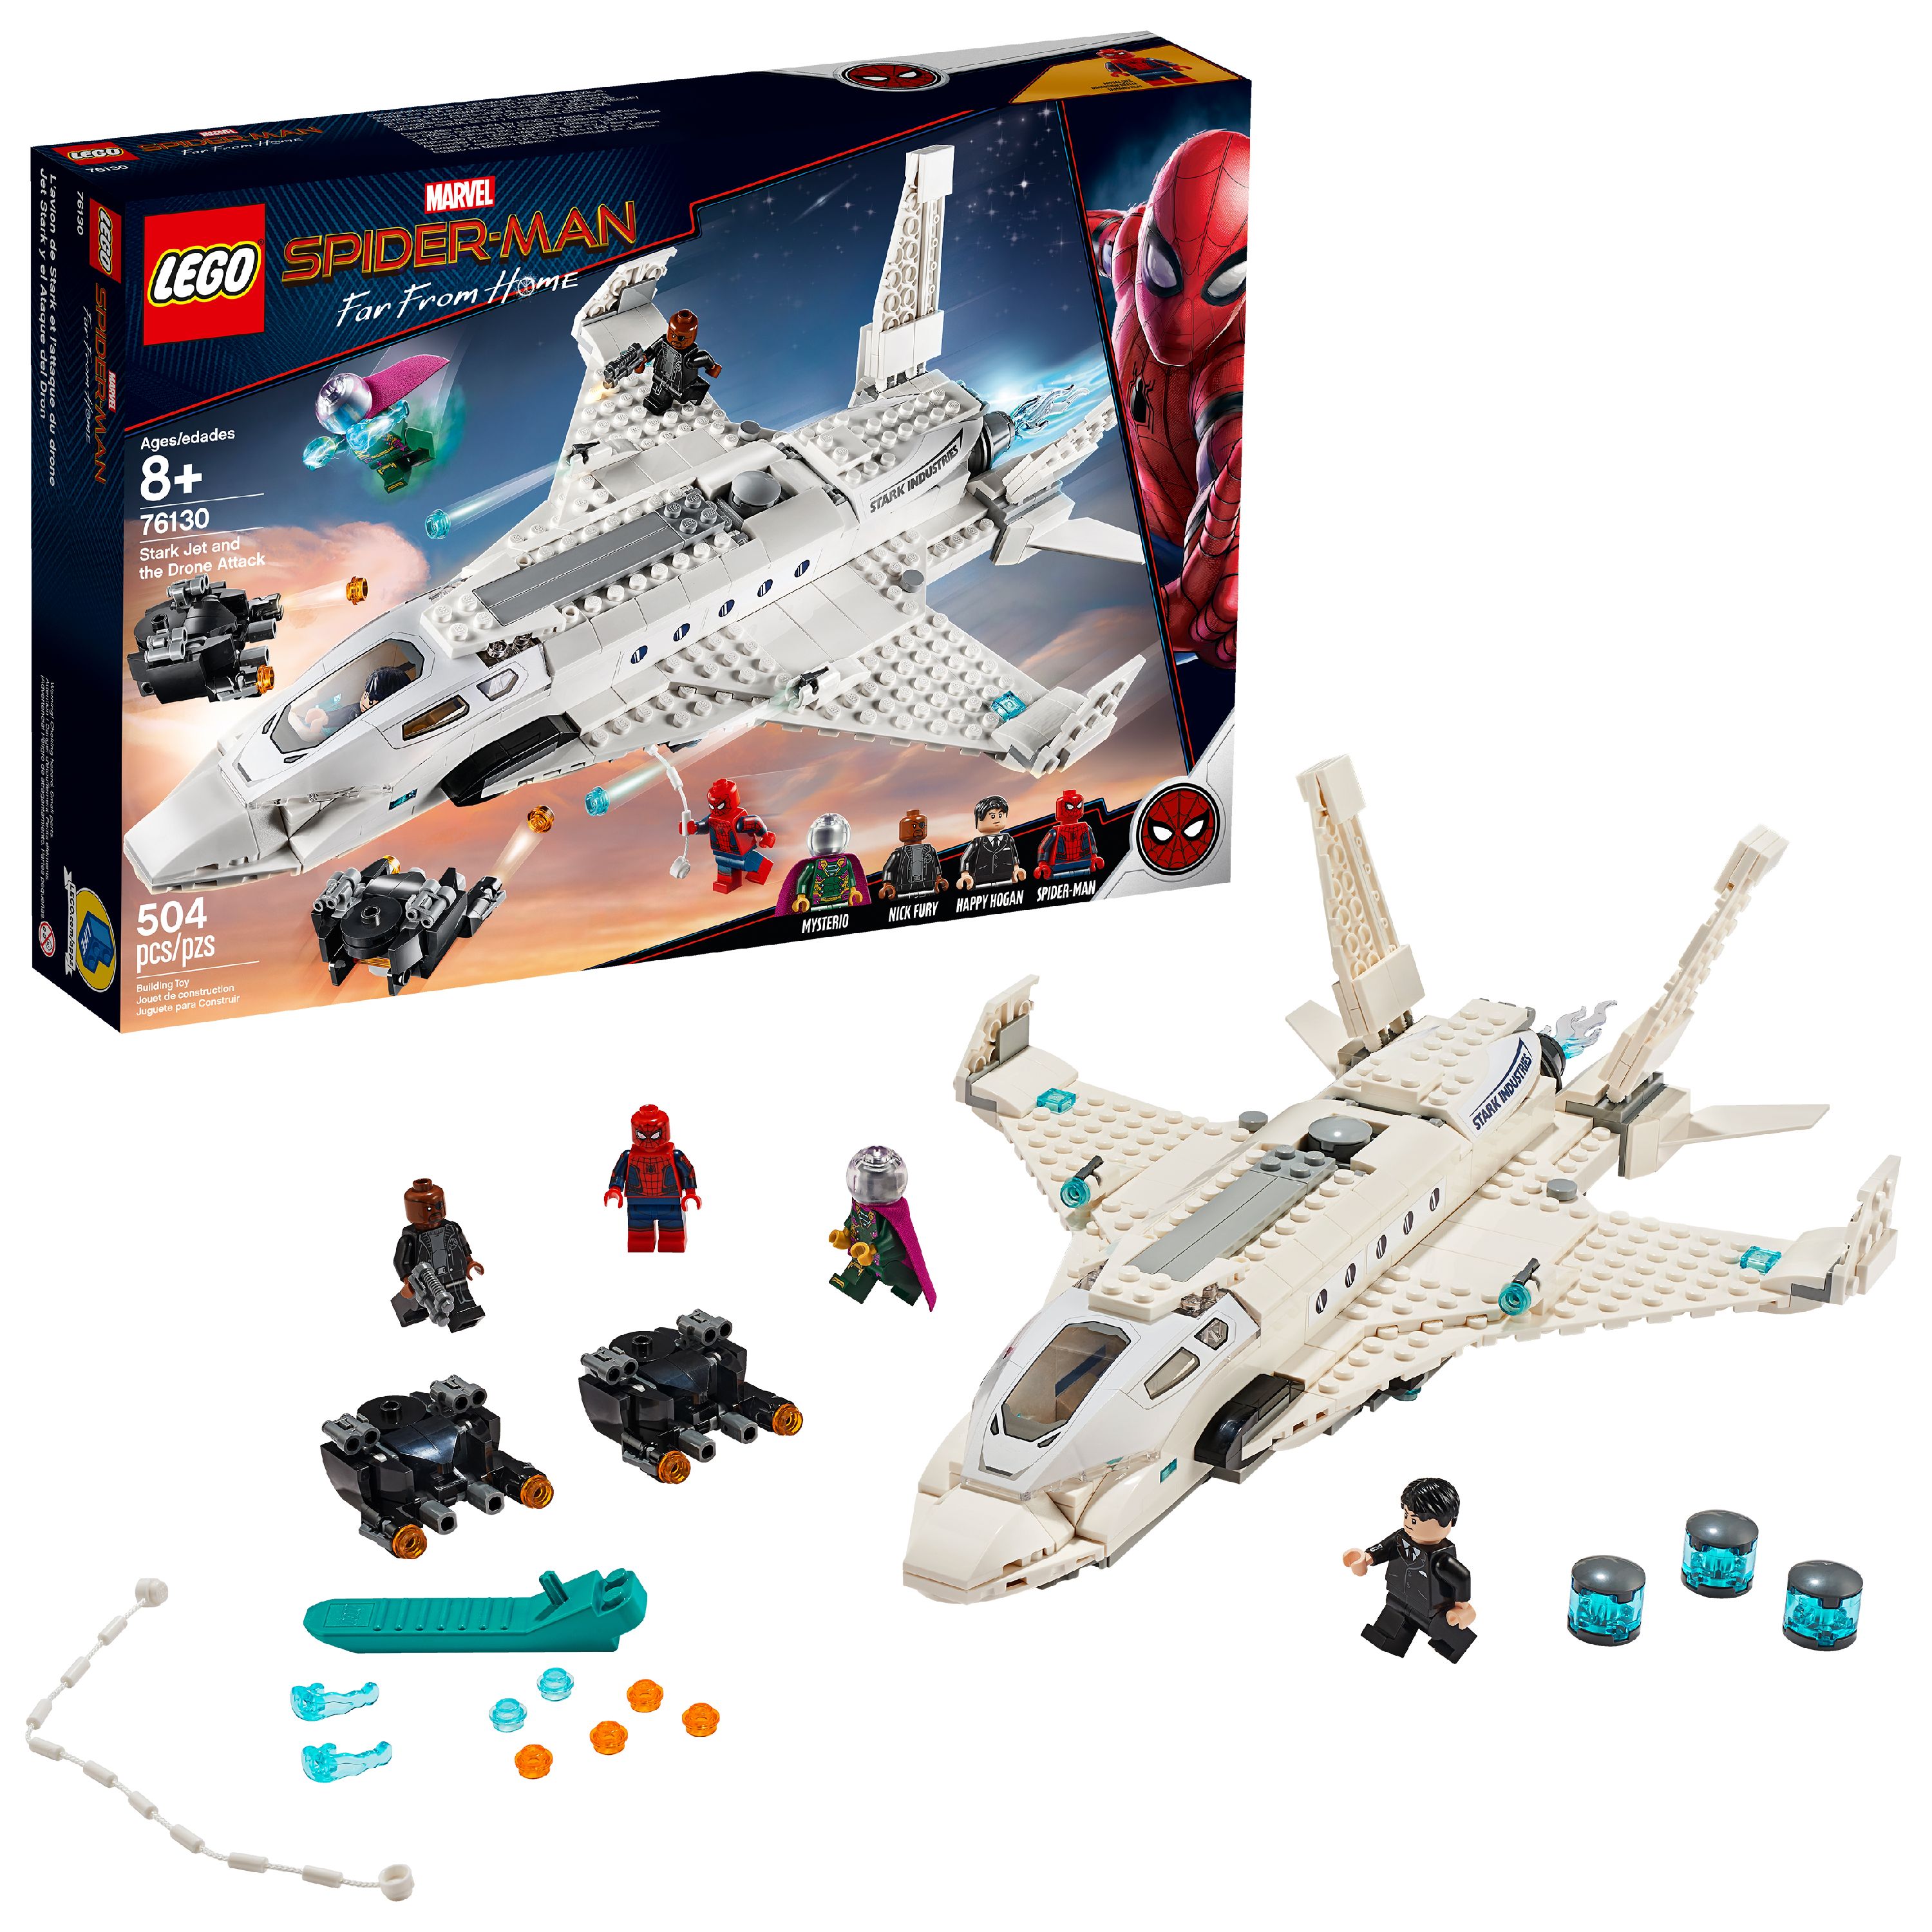 LEGO Marvel Spider-Man Far From Home: Stark Jet and the Drone Attack Superhero Set 76130 - image 1 of 7